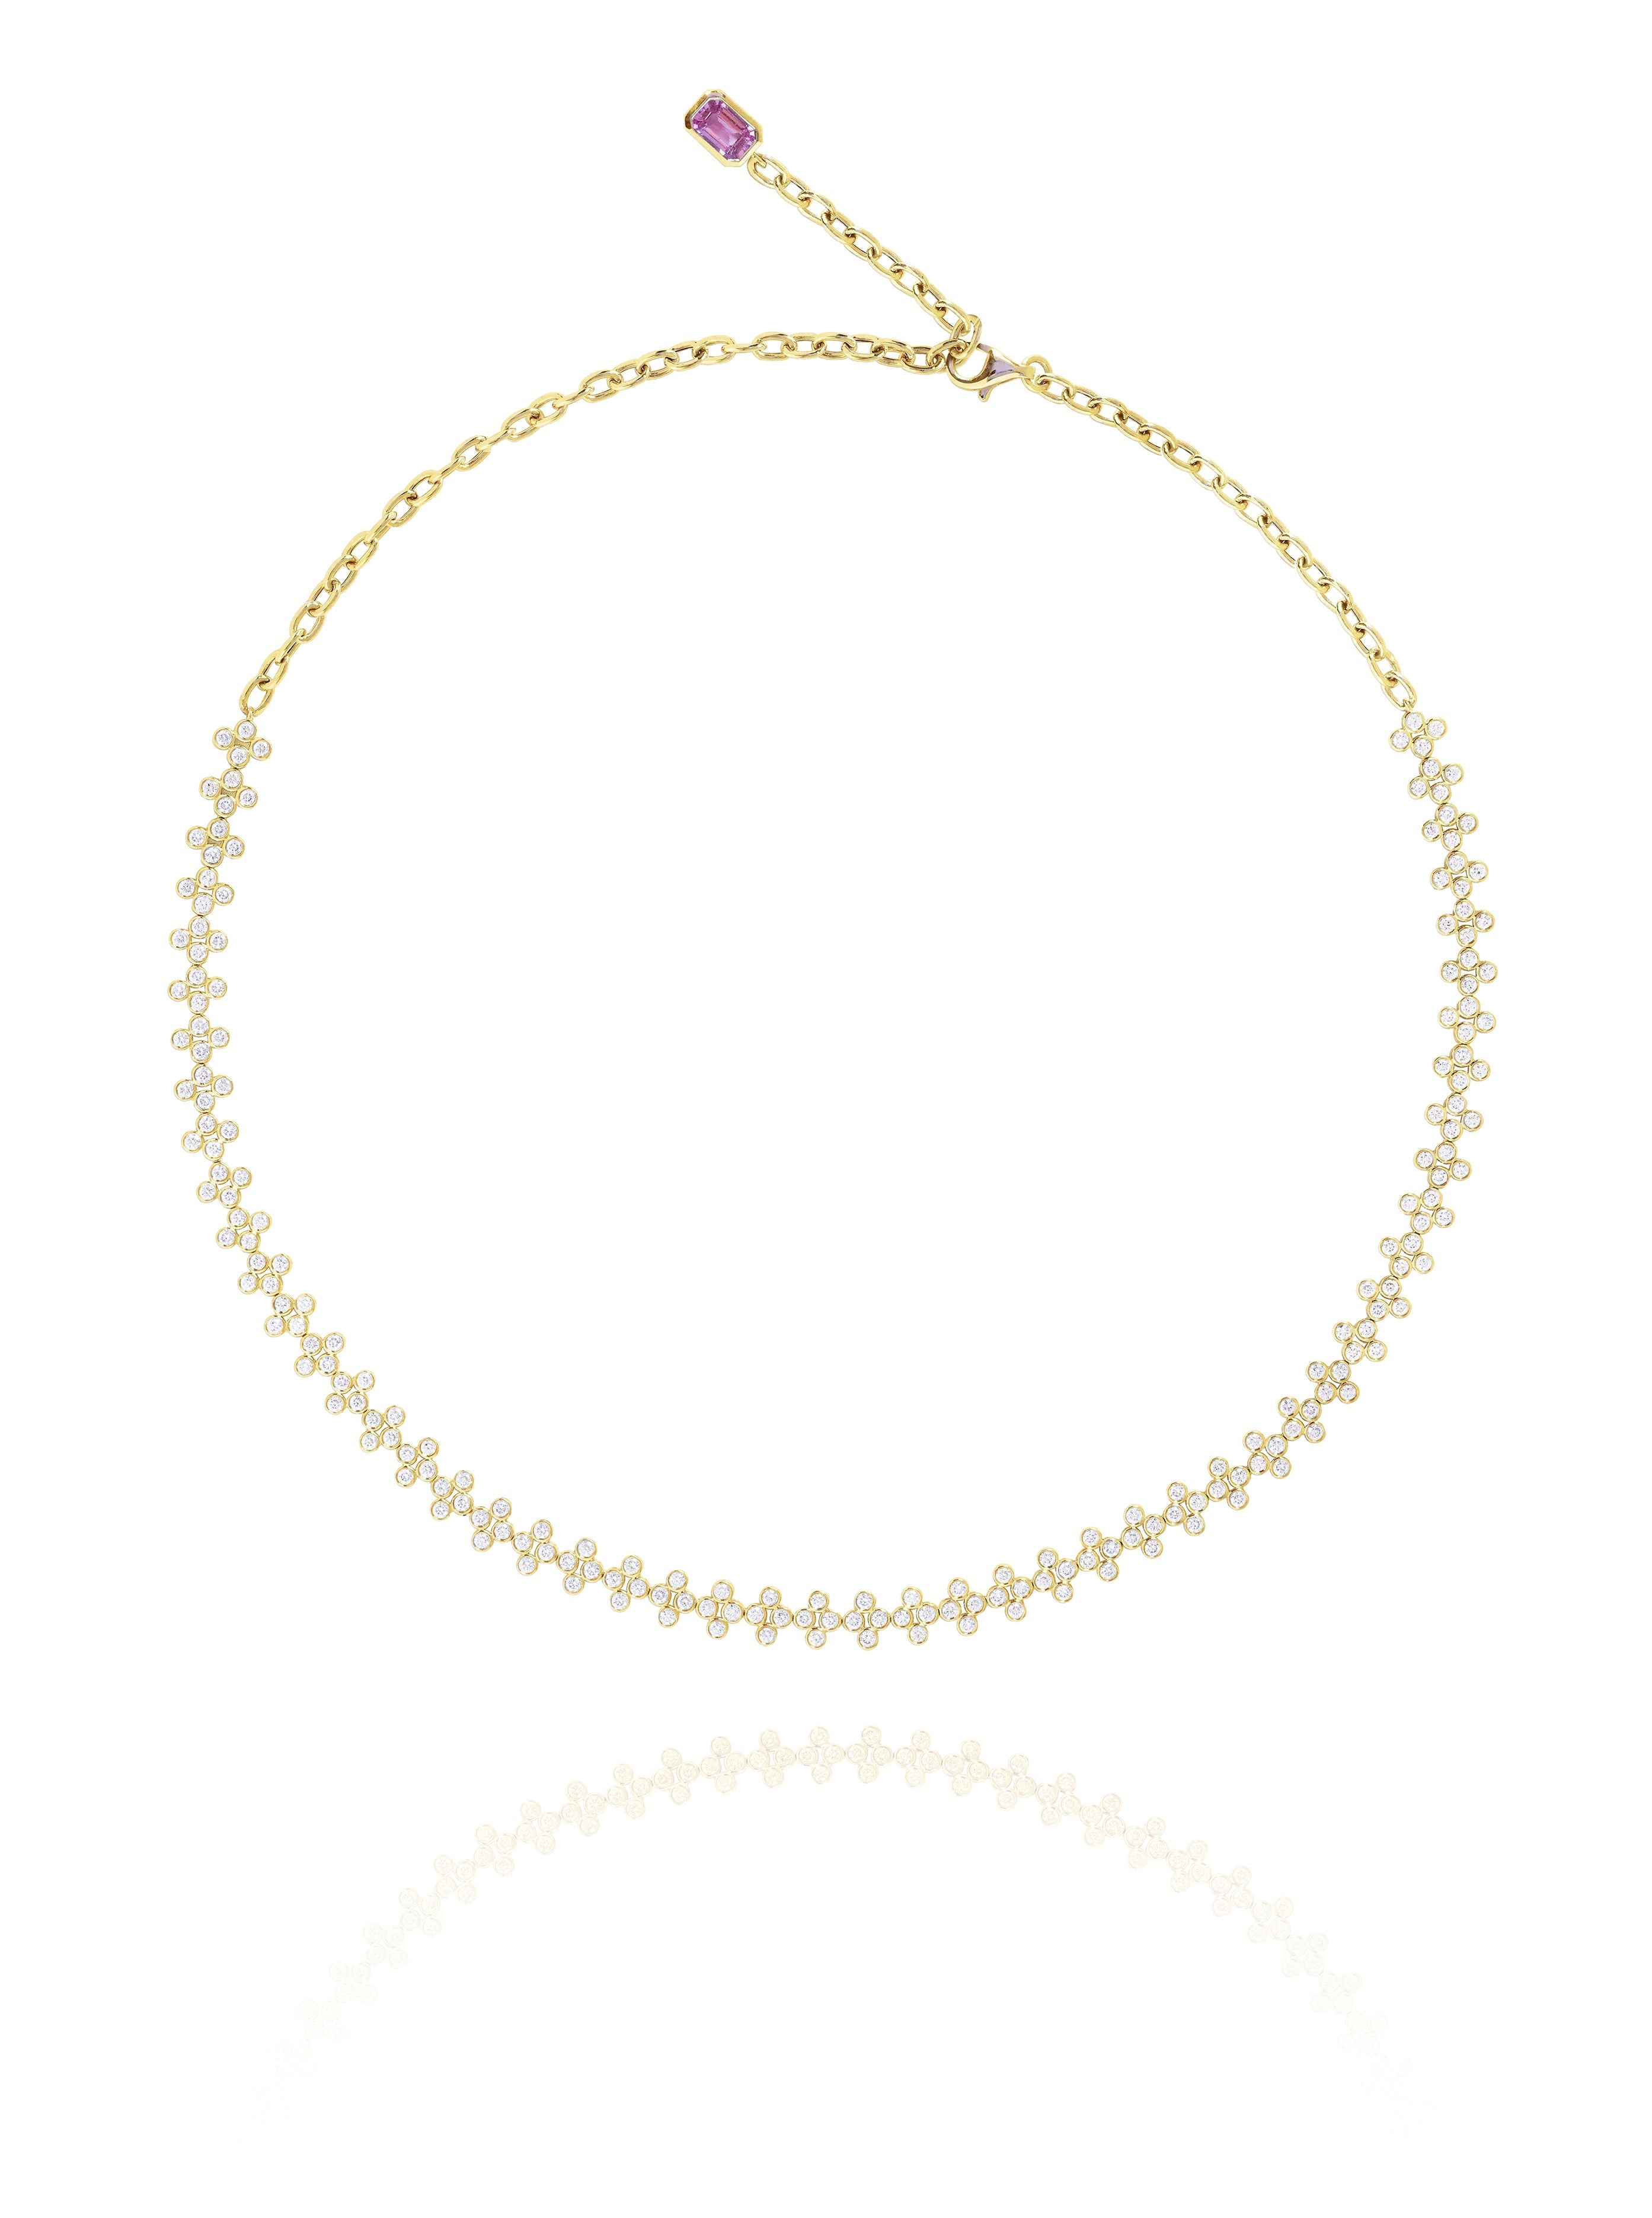 Diamond Tattoo Necklace in Yellow Gold